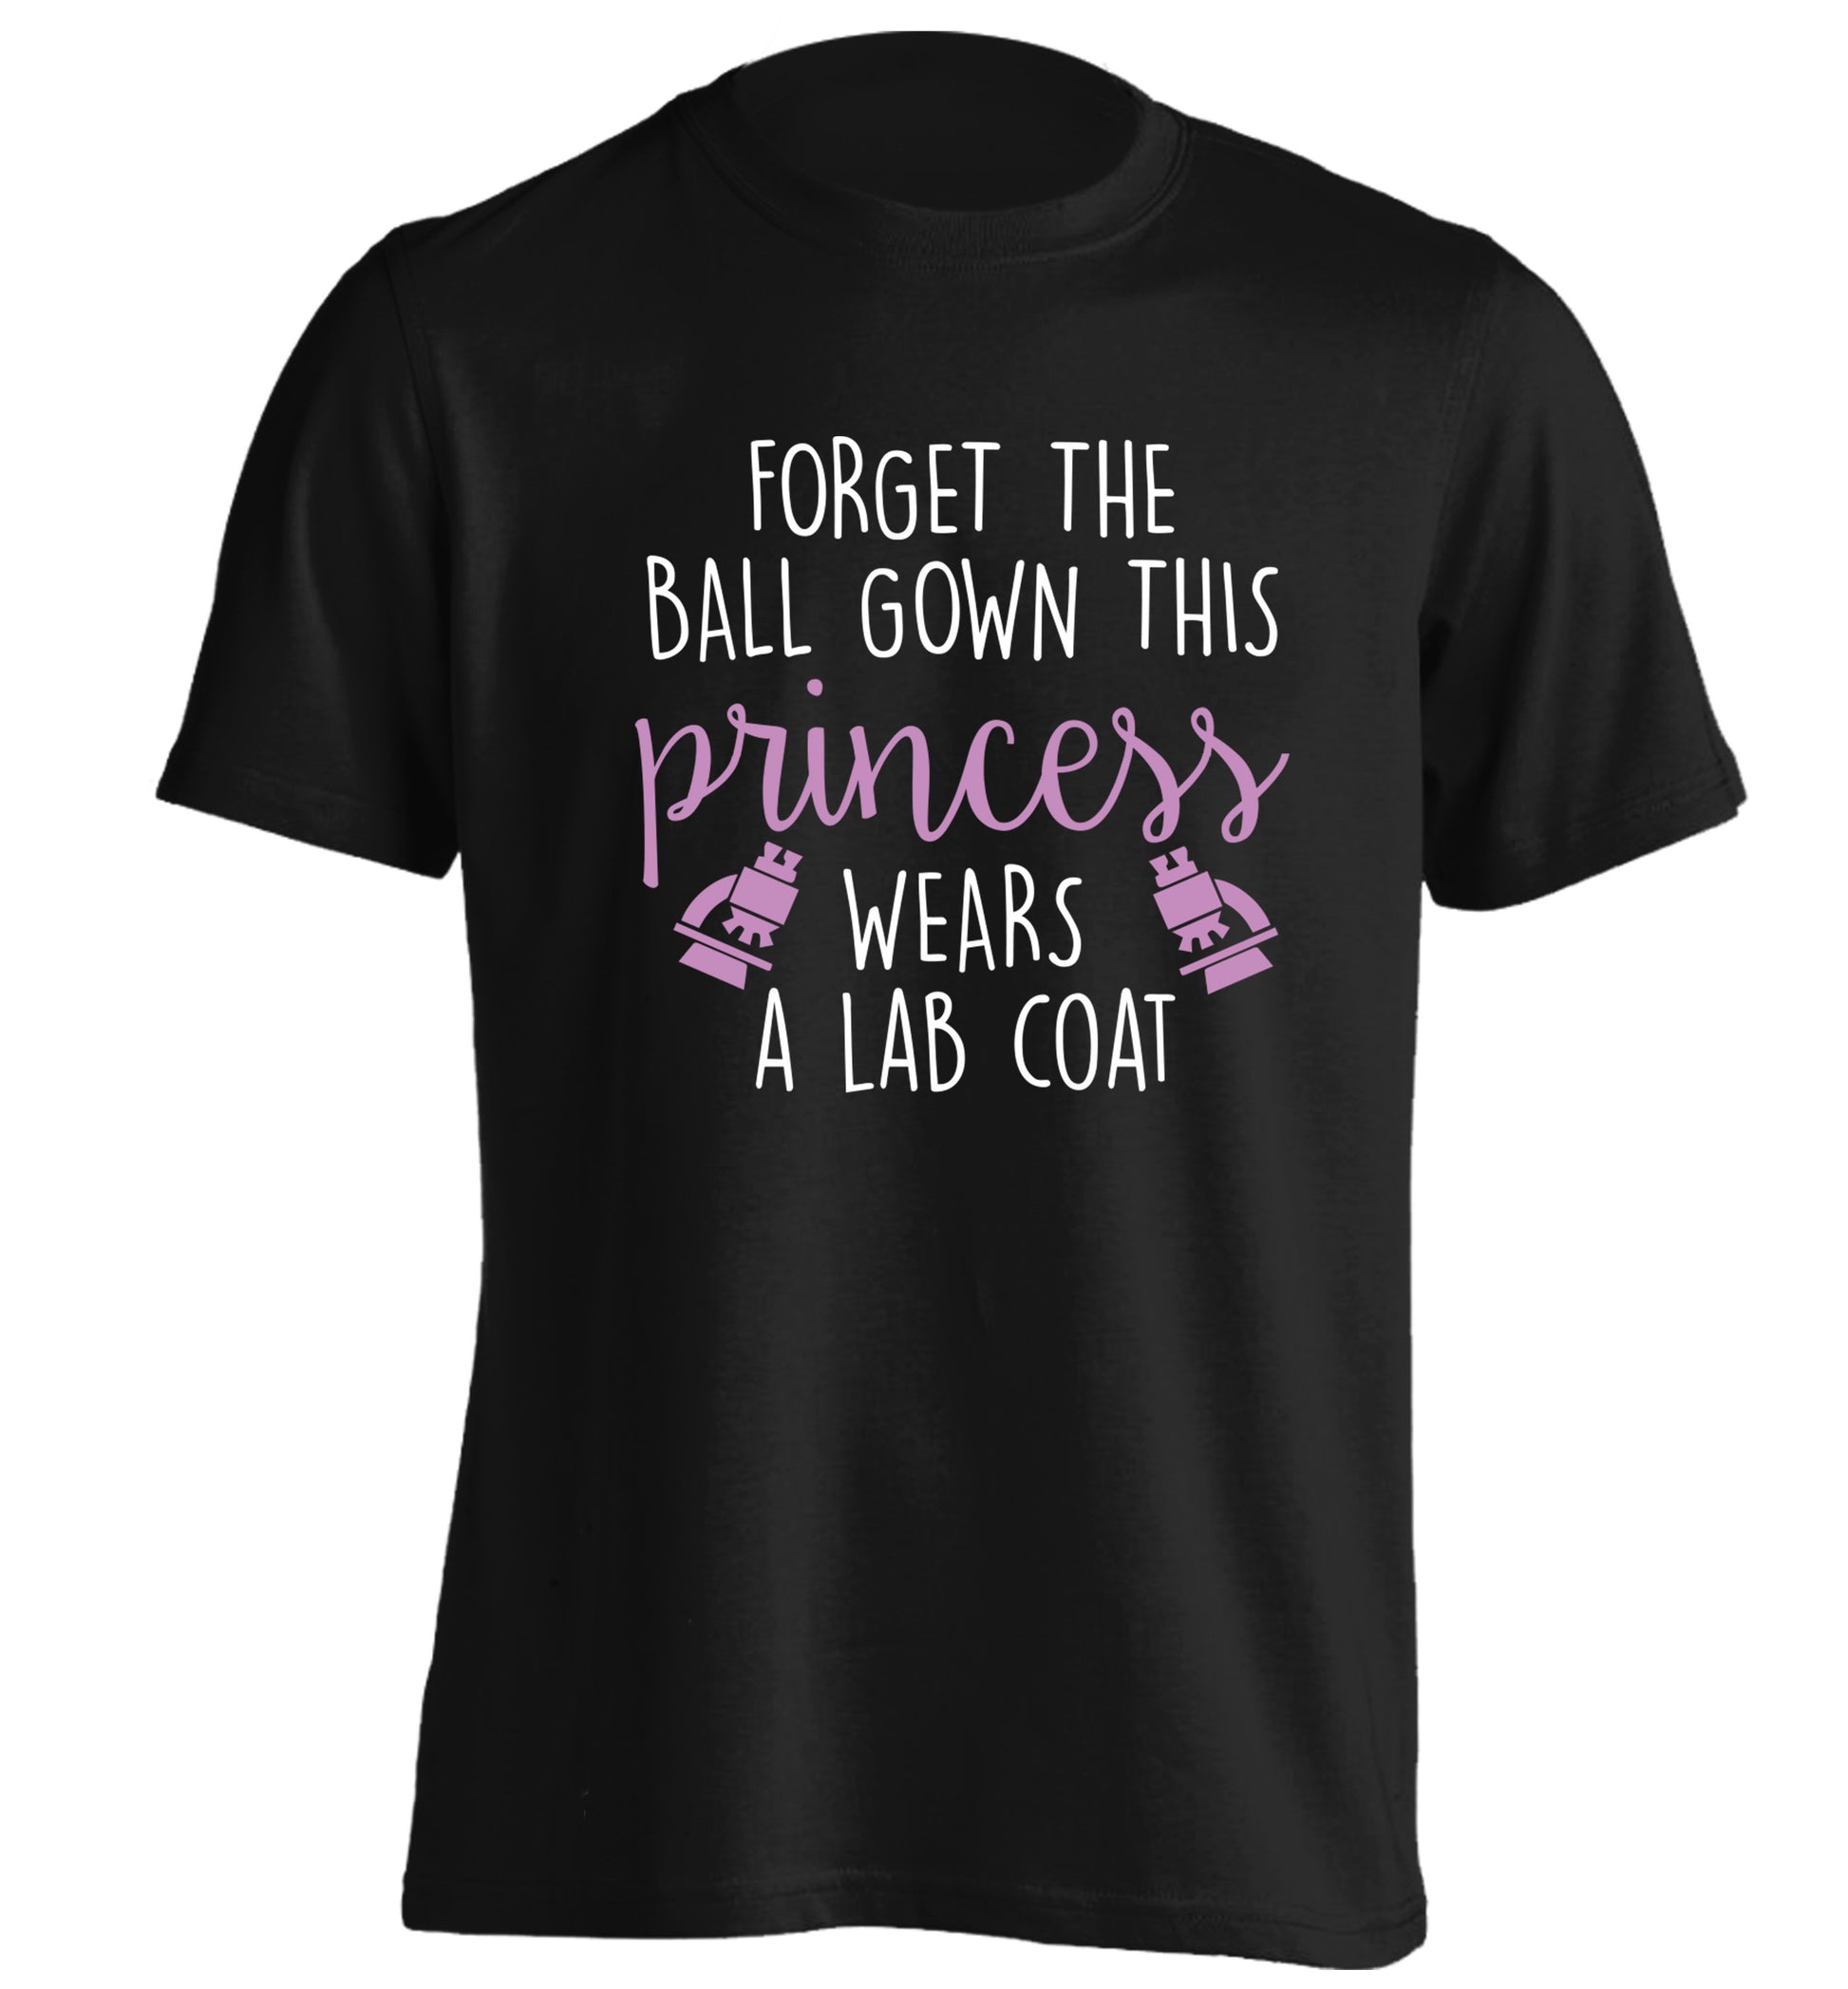 Forget the ball gown this princess wears a lab coat adults unisex black Tshirt 2XL